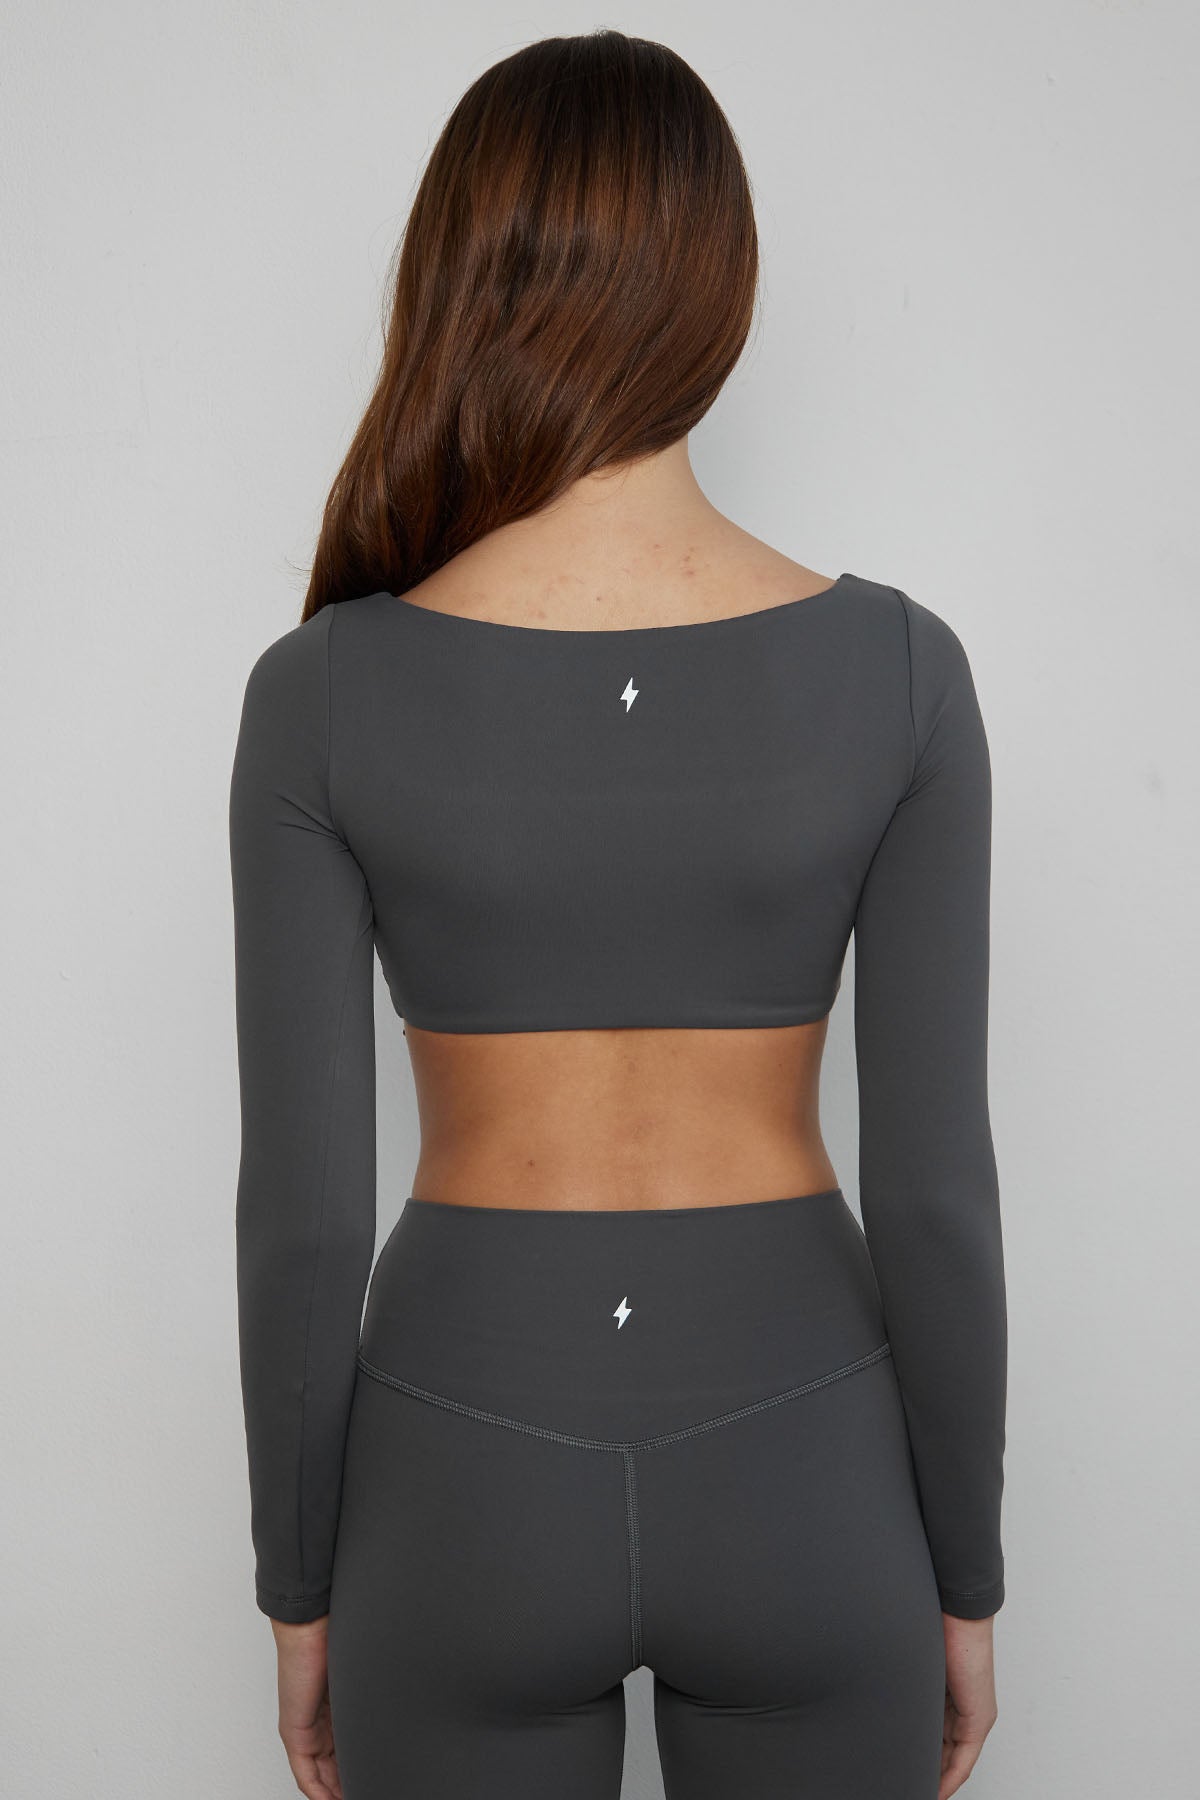 CLASSIC FIT SCOOP LONG SLEEVE CROP - PAVEMENT